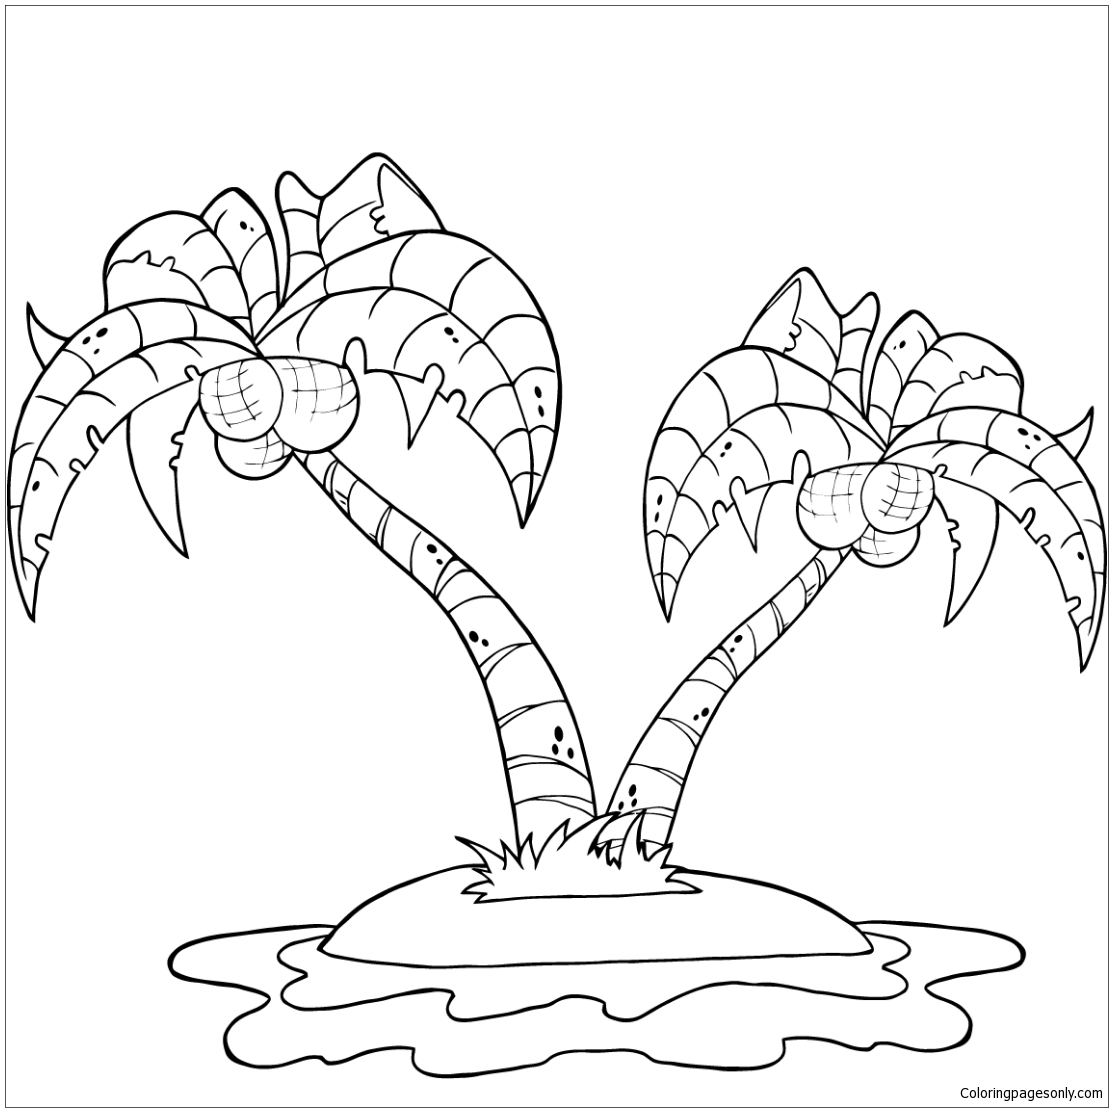 Coconut Palm Trees On Island Coloring Pages